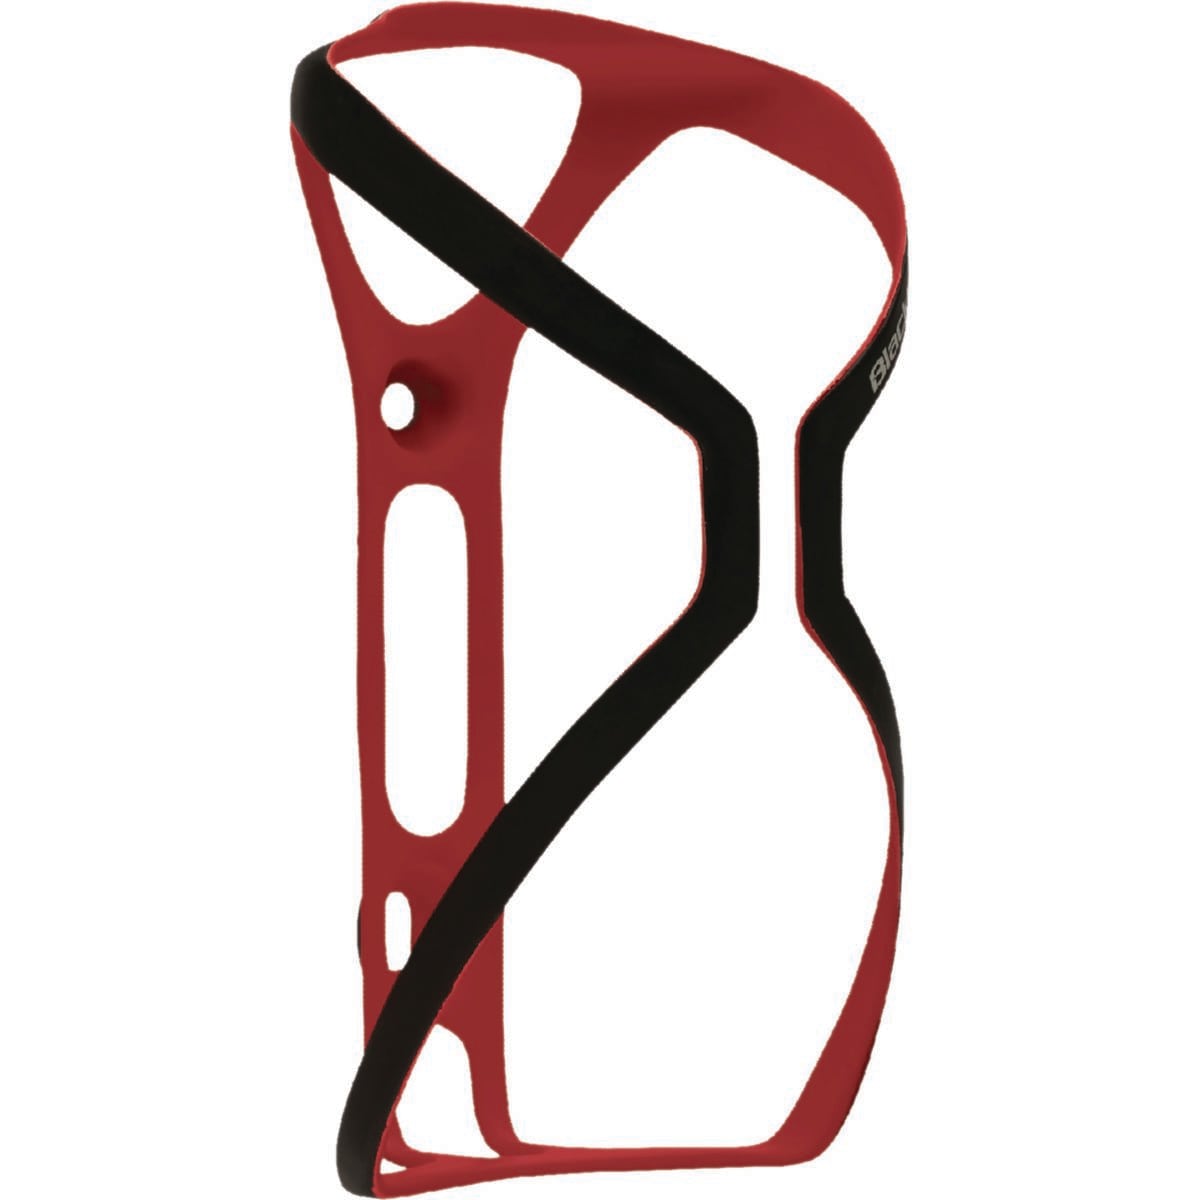 Blackburn Cinch Carbon Fiber Cage Gloss Red, One Size